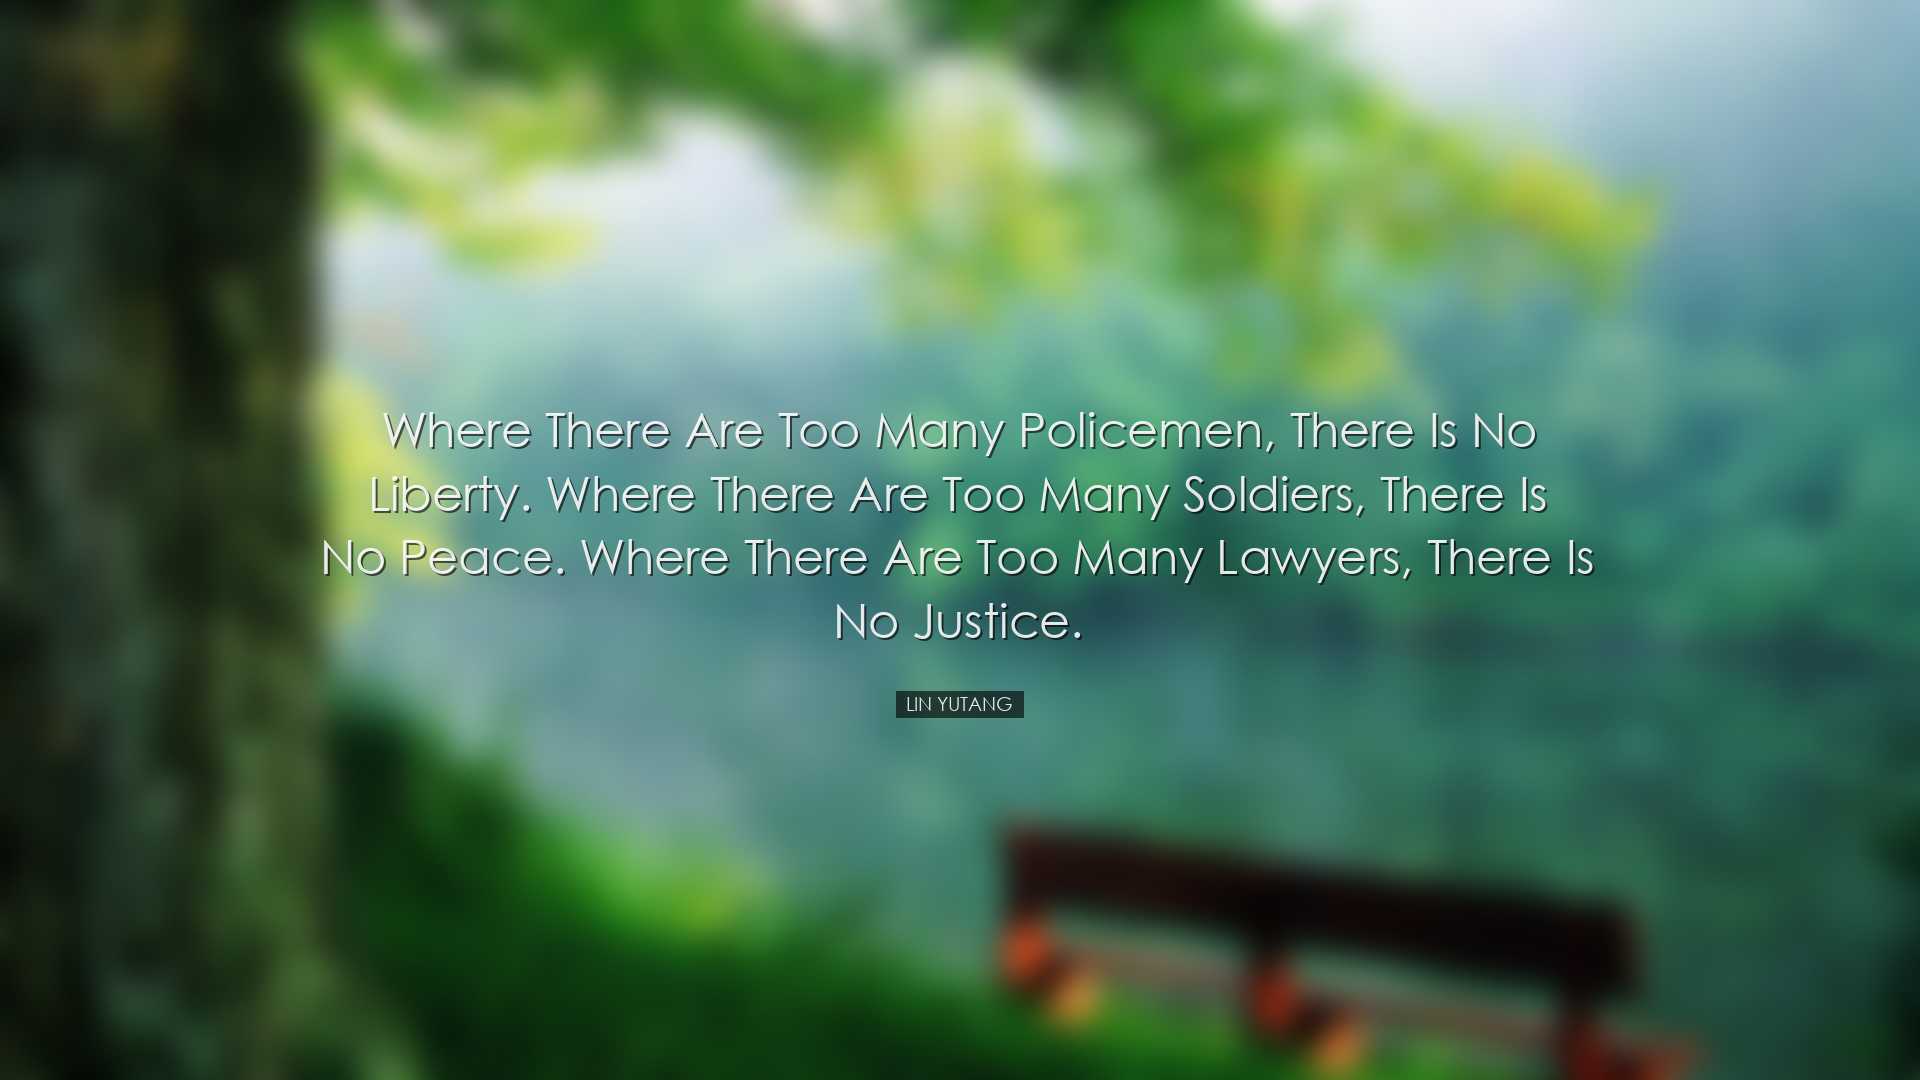 Where there are too many policemen, there is no liberty. Where the